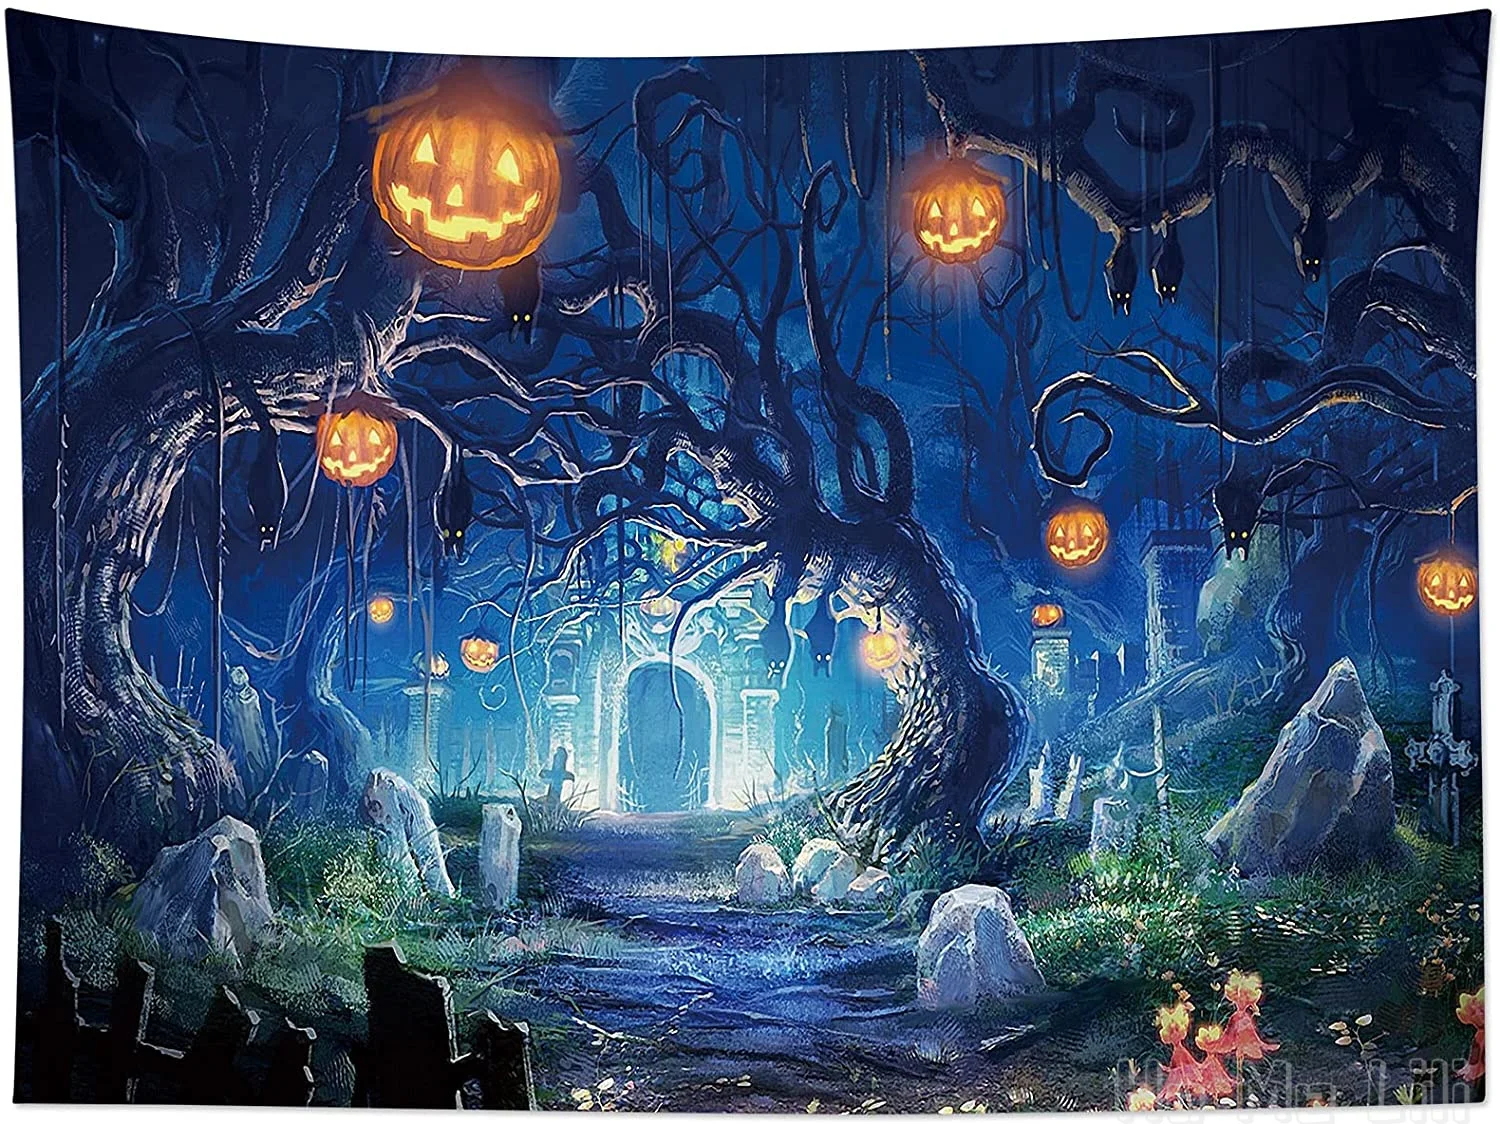 

Halloween Night By Ho Me Lili Tapestry Wall Hanging Haunted Woods With Grave And Pumpkins Blanket For Bedroom Living Room Dorm